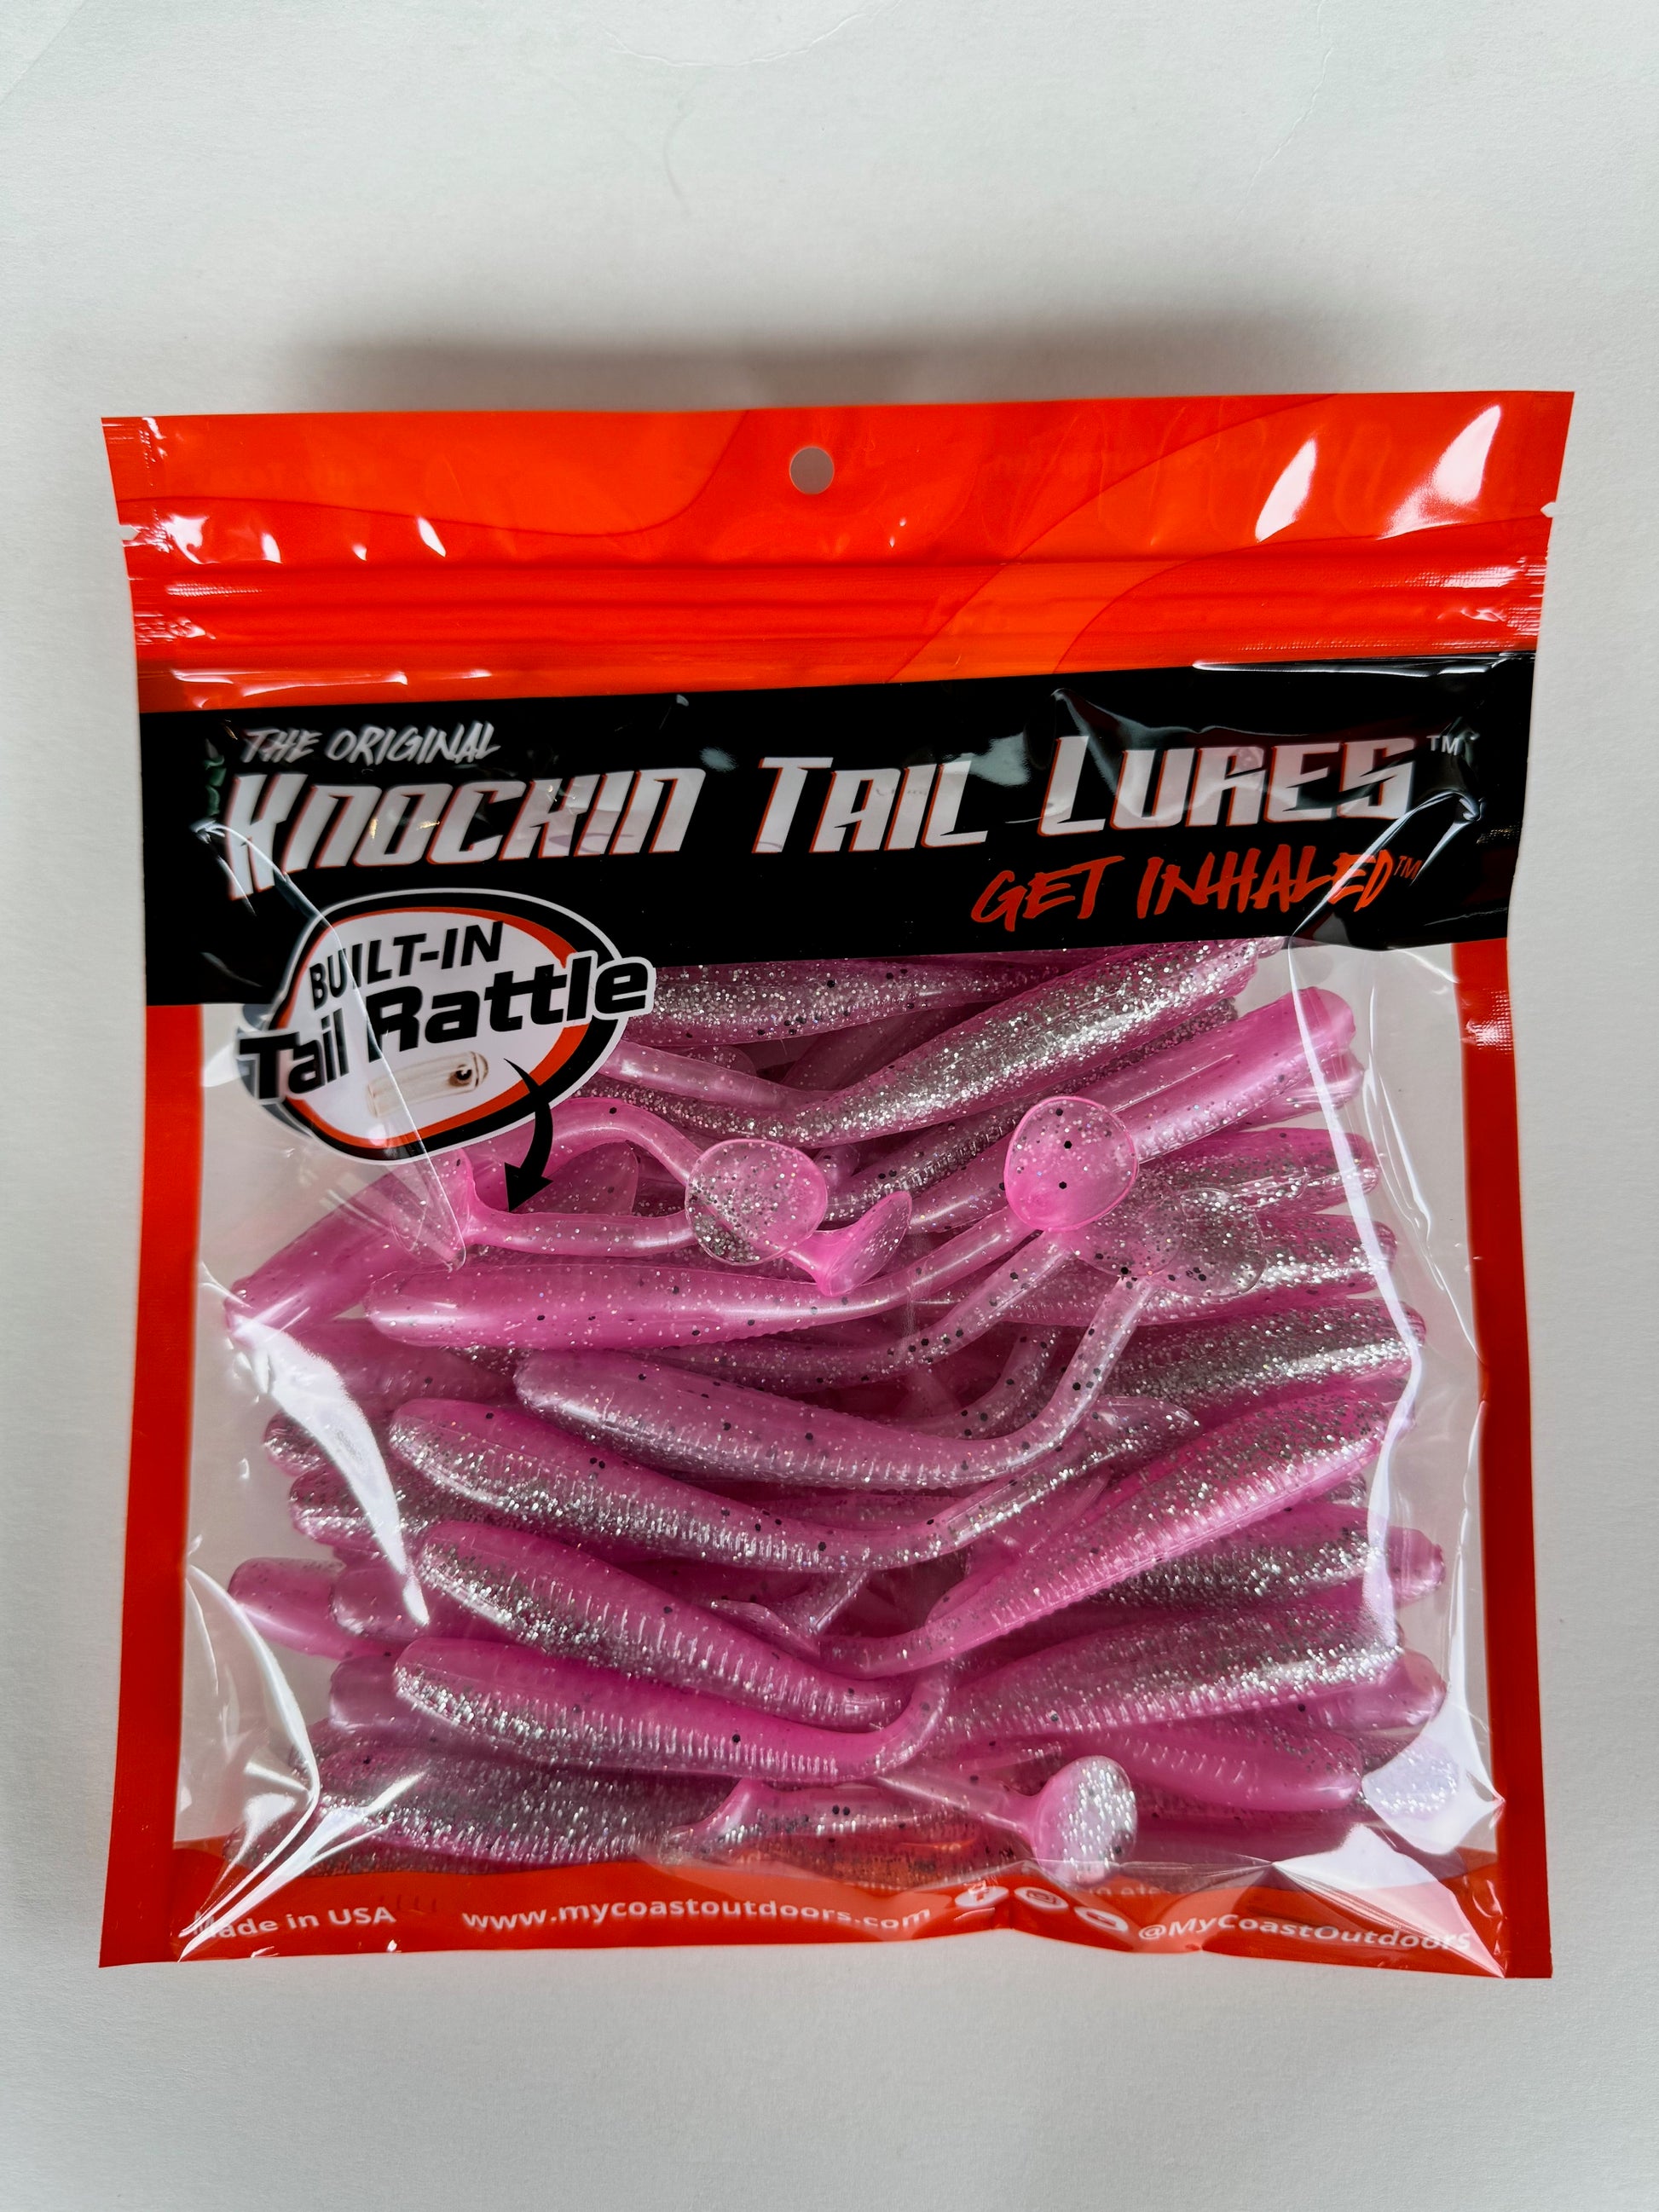 Knockin Tail Lures - Built-In Tail Rattle! - 6pk